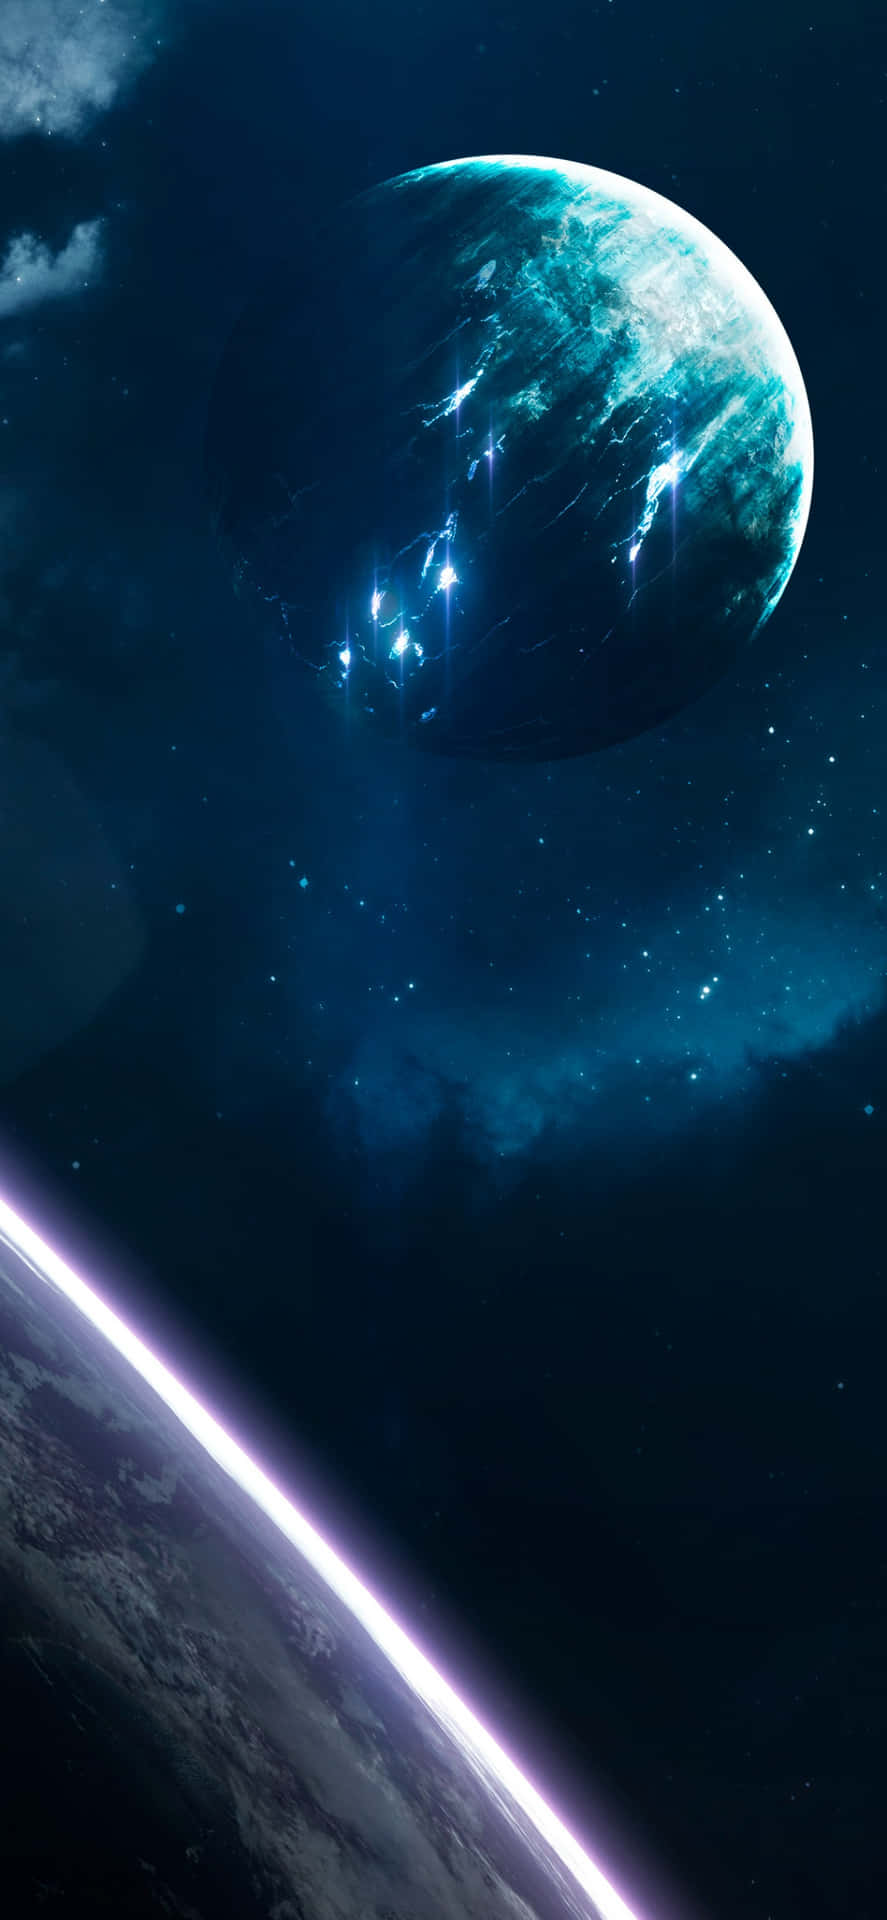 Experience the galaxy with the Blue Galaxy iPhone Wallpaper